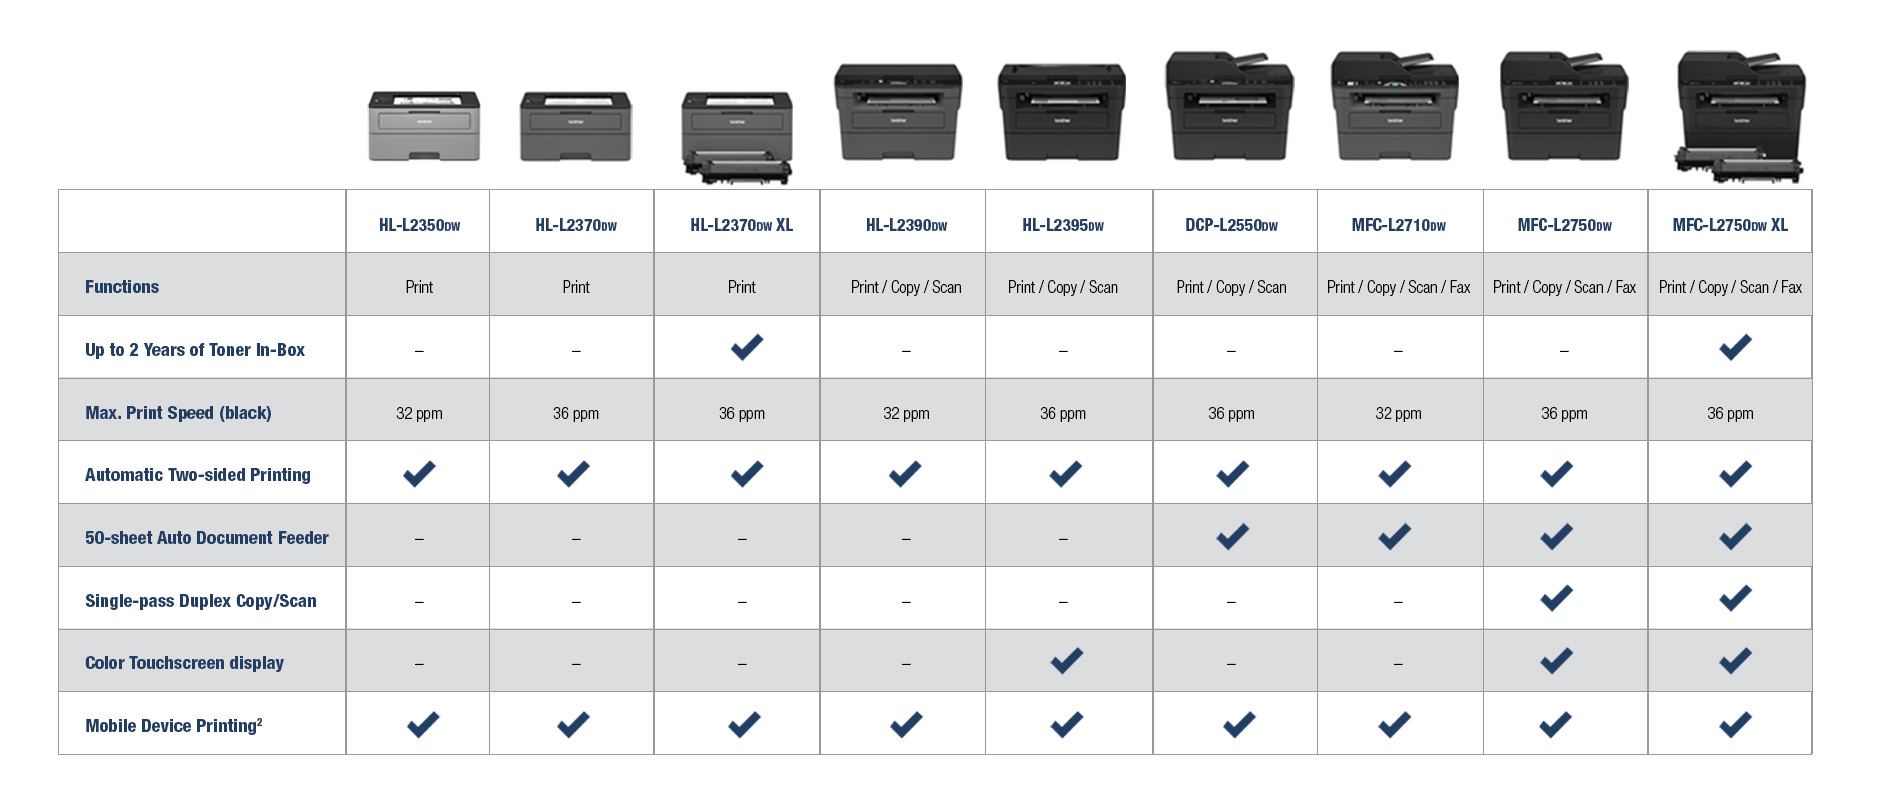 All of the models in the new Brother lineup of laser monochrome printers feature wireless connectivity, making it easy to print from your mobile device